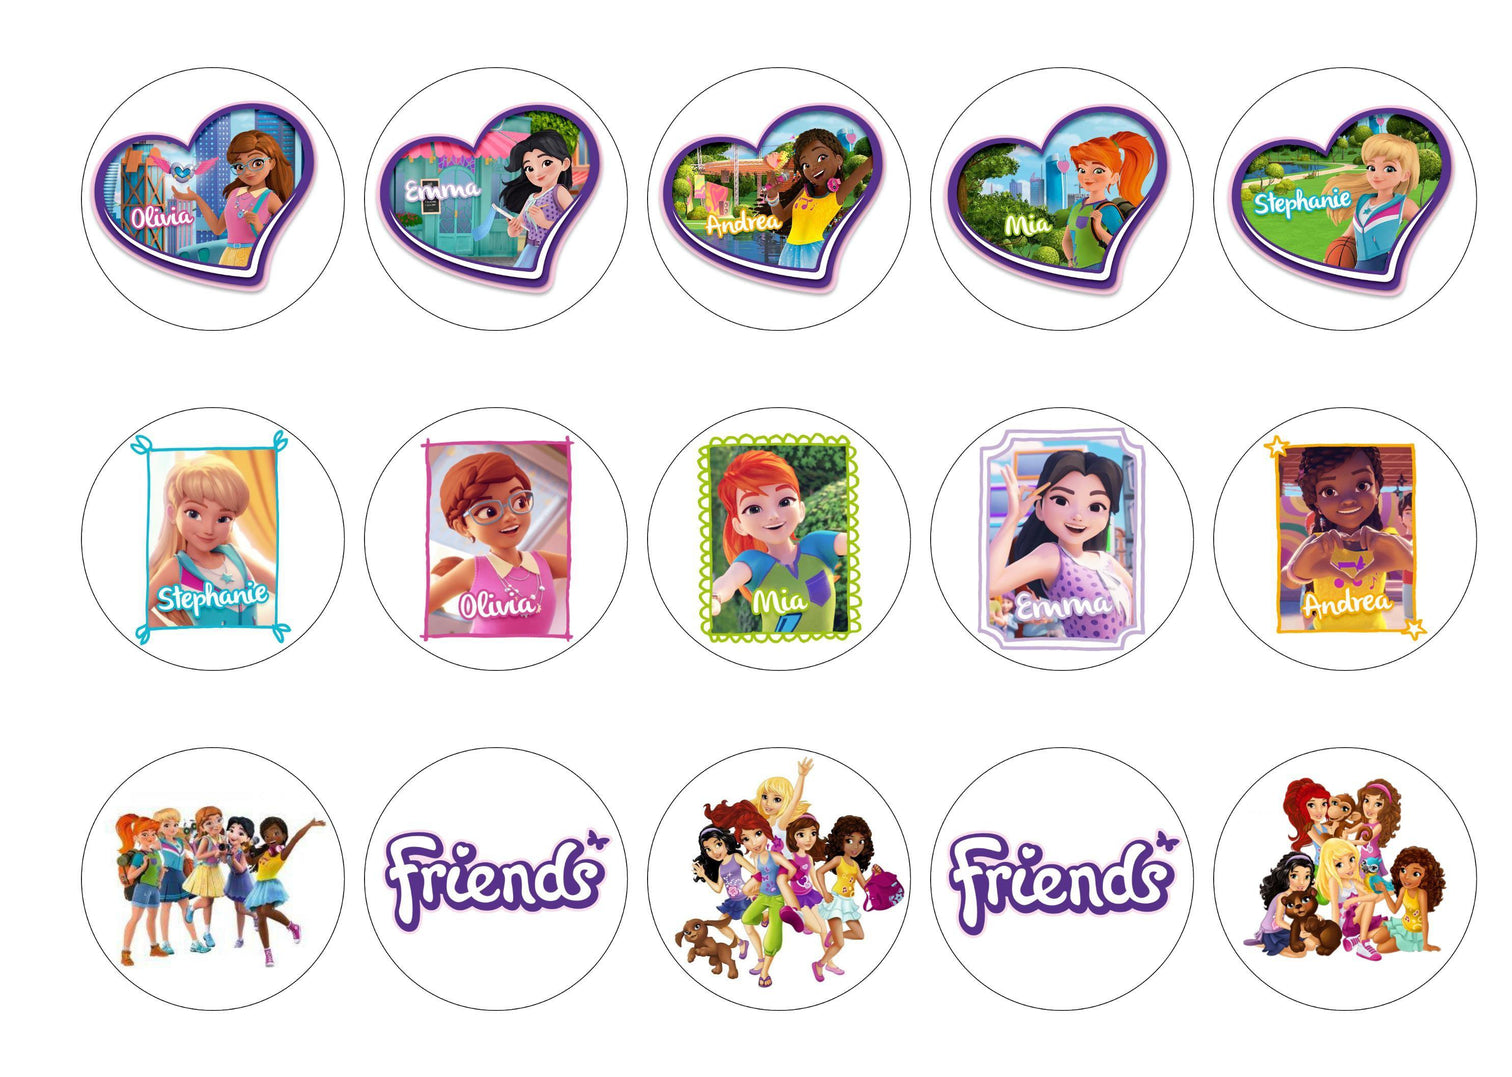 Lego Friends – My Cupcake Toppers